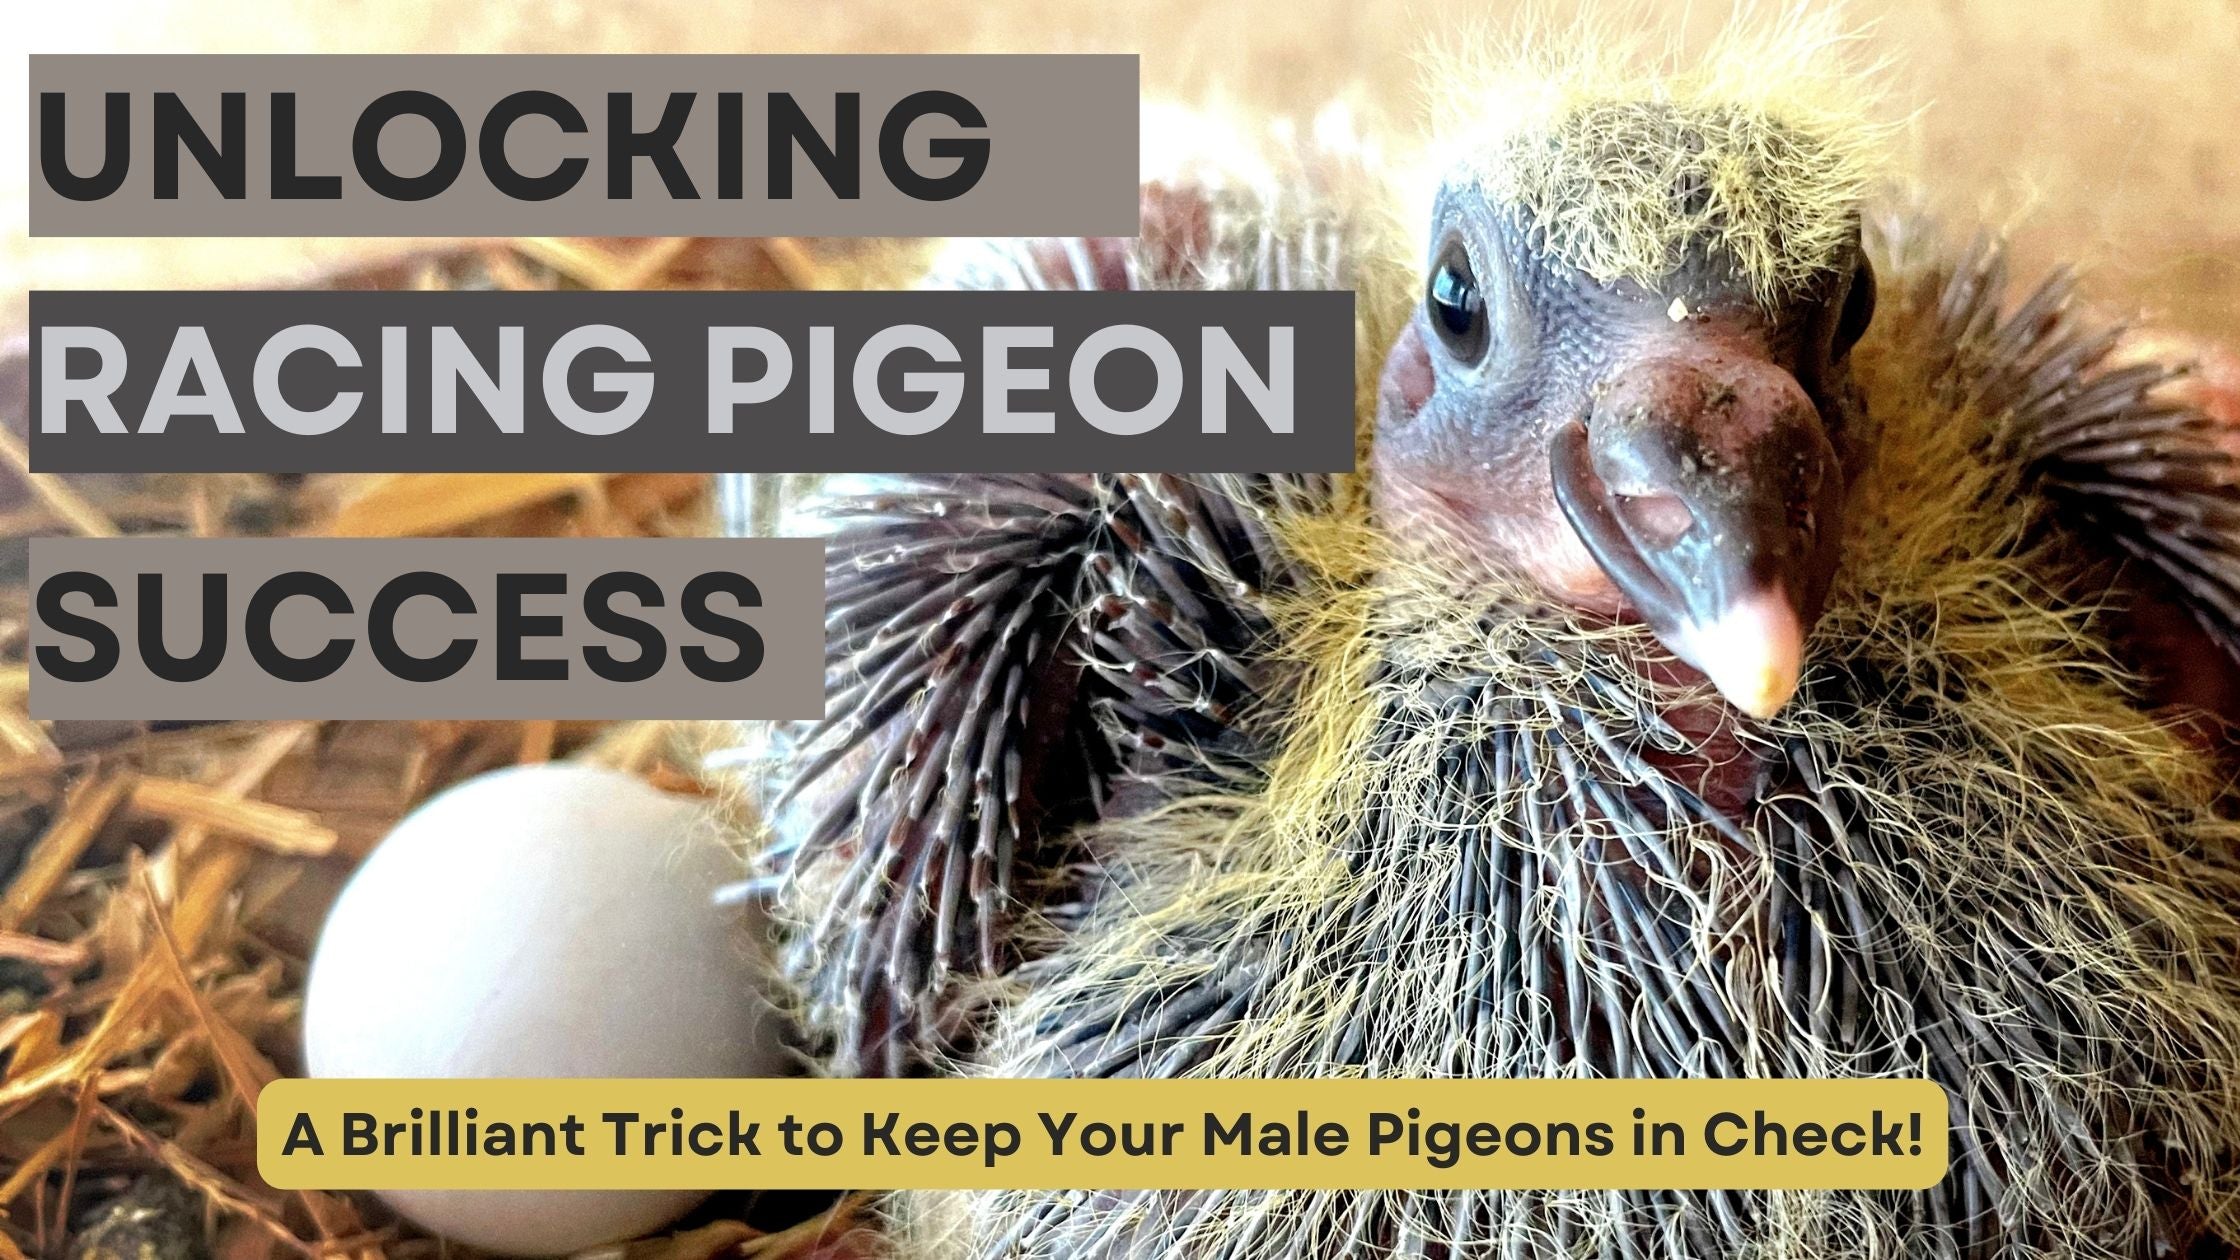 A Brilliant Trick to Keep Your Male Pigeons in Check!